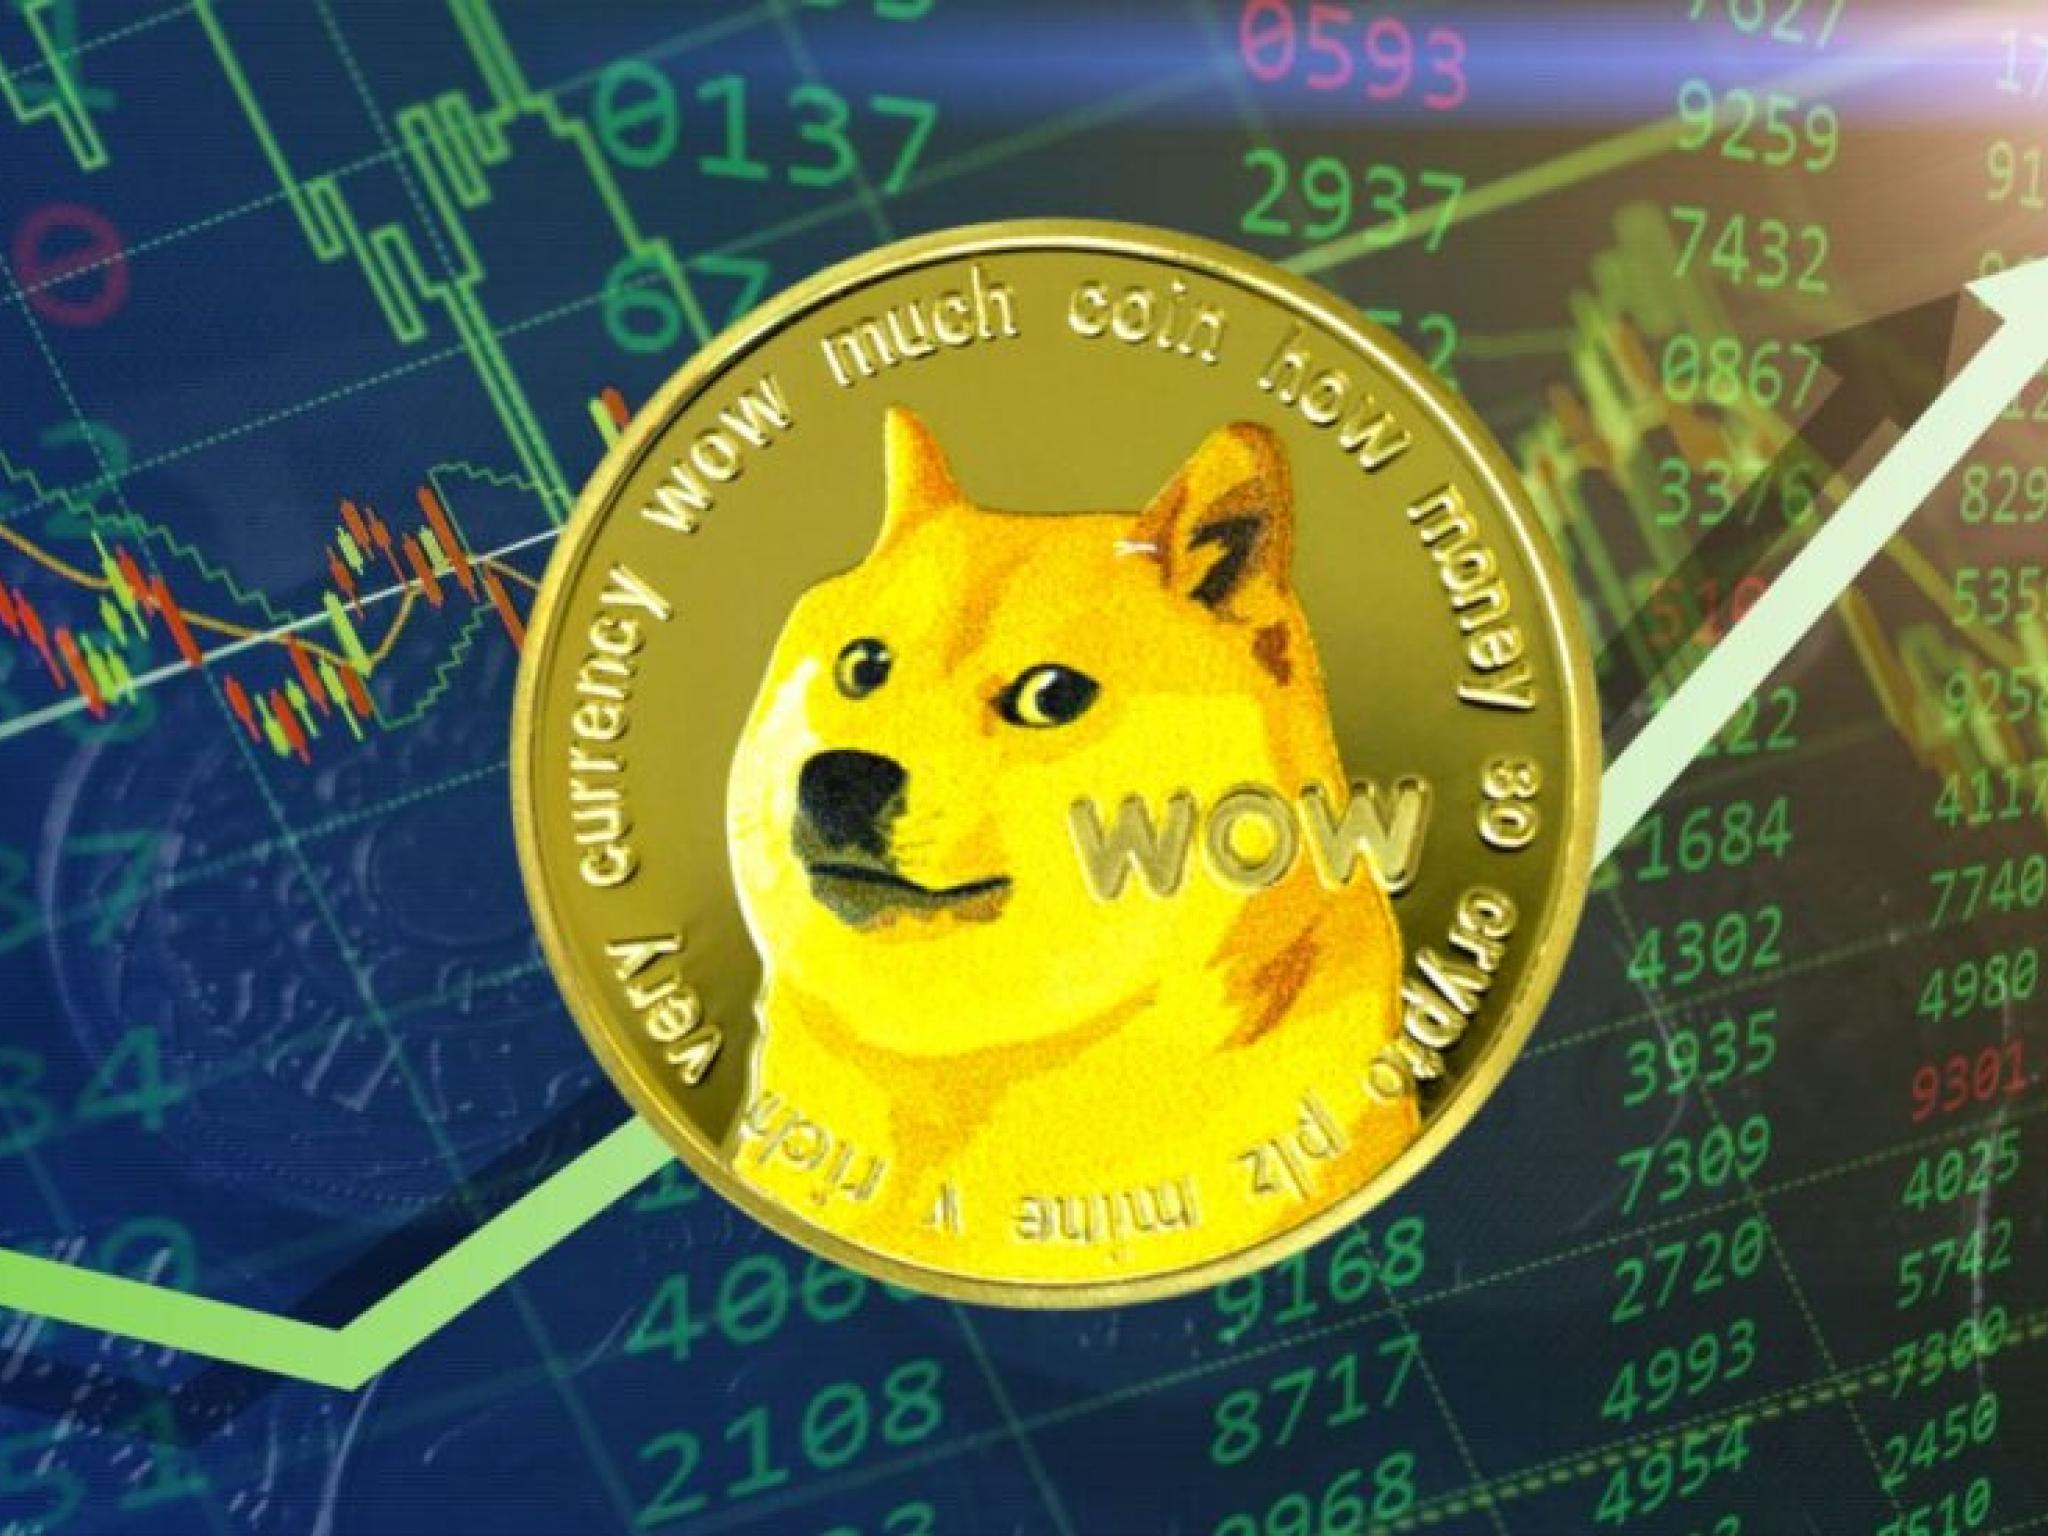  dogecoin-down-25-in-past-week-but-if-you-get-a-chance-to-buy-it-in-the-high-010s-buy-it-says-trader 